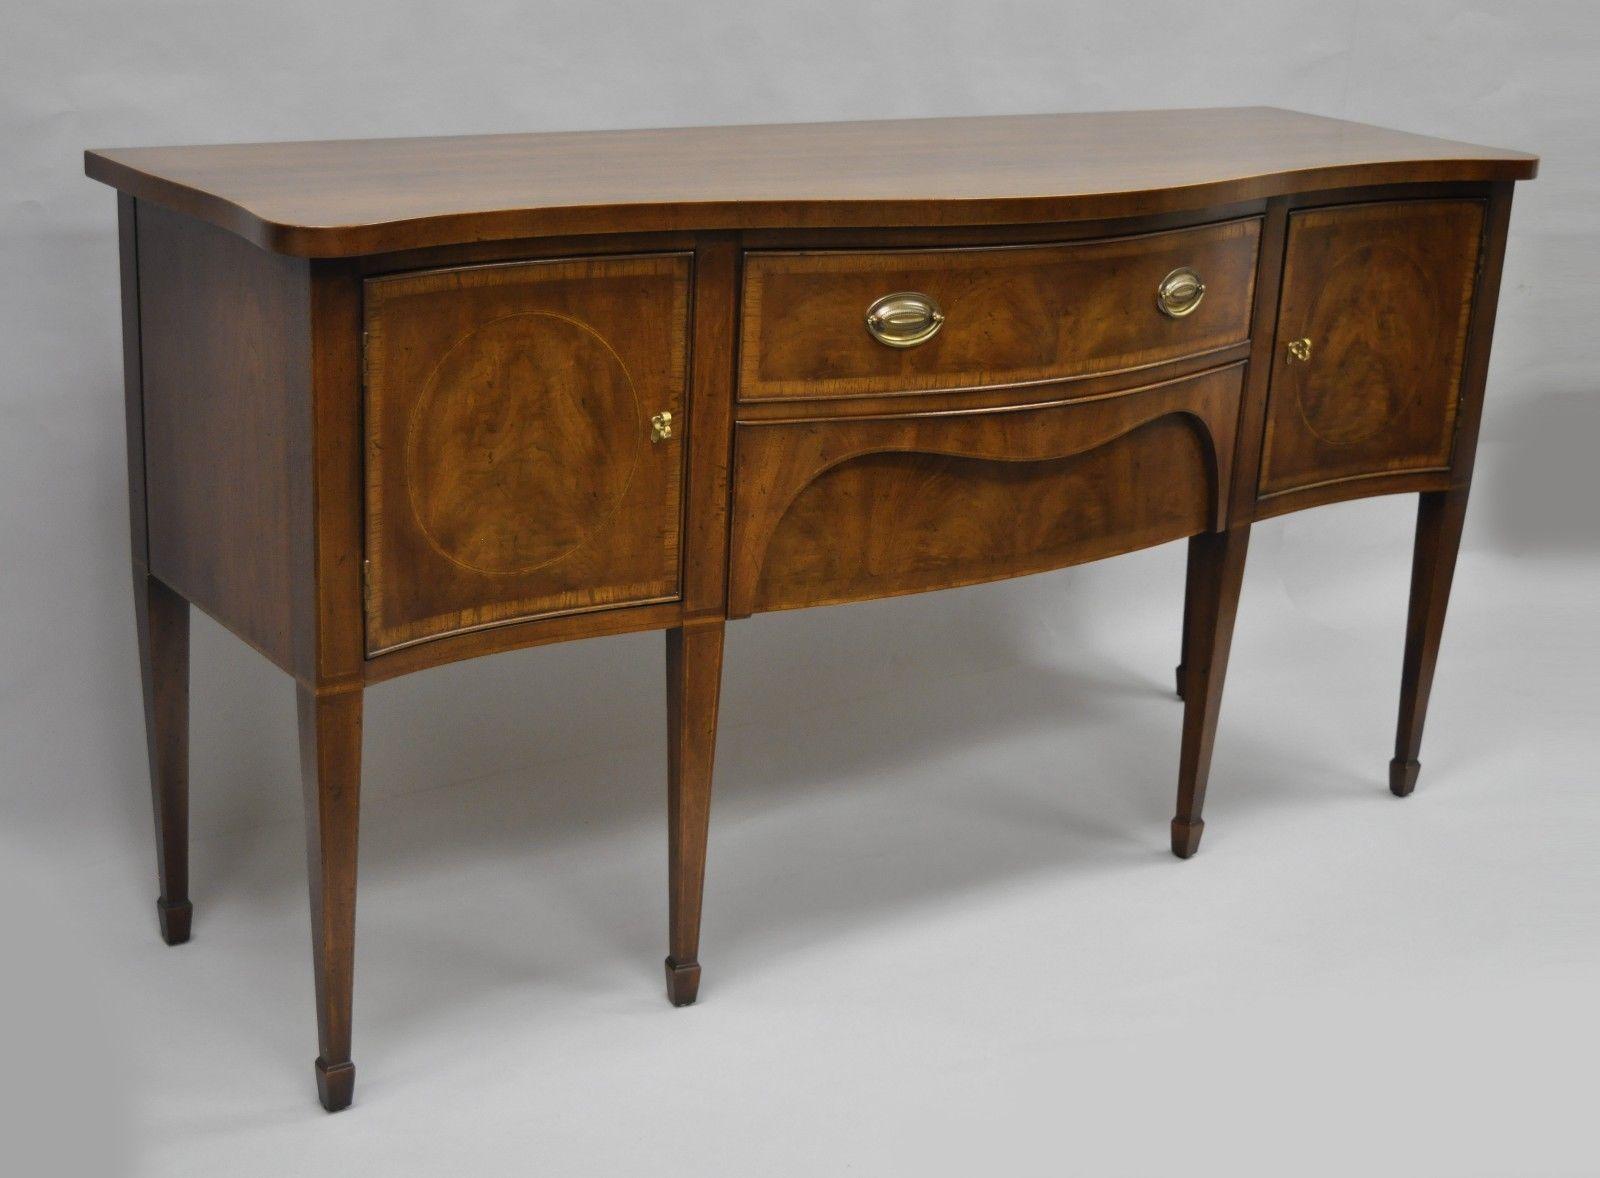 Henredon 18th century portfolio banded mahogany sideboard sideboard. Item details long slender tapered legs, beautiful wood grain, two dovetail constructed drawers, two cabinet doors, banded bow front, brass hardware, Henredon branding to inner